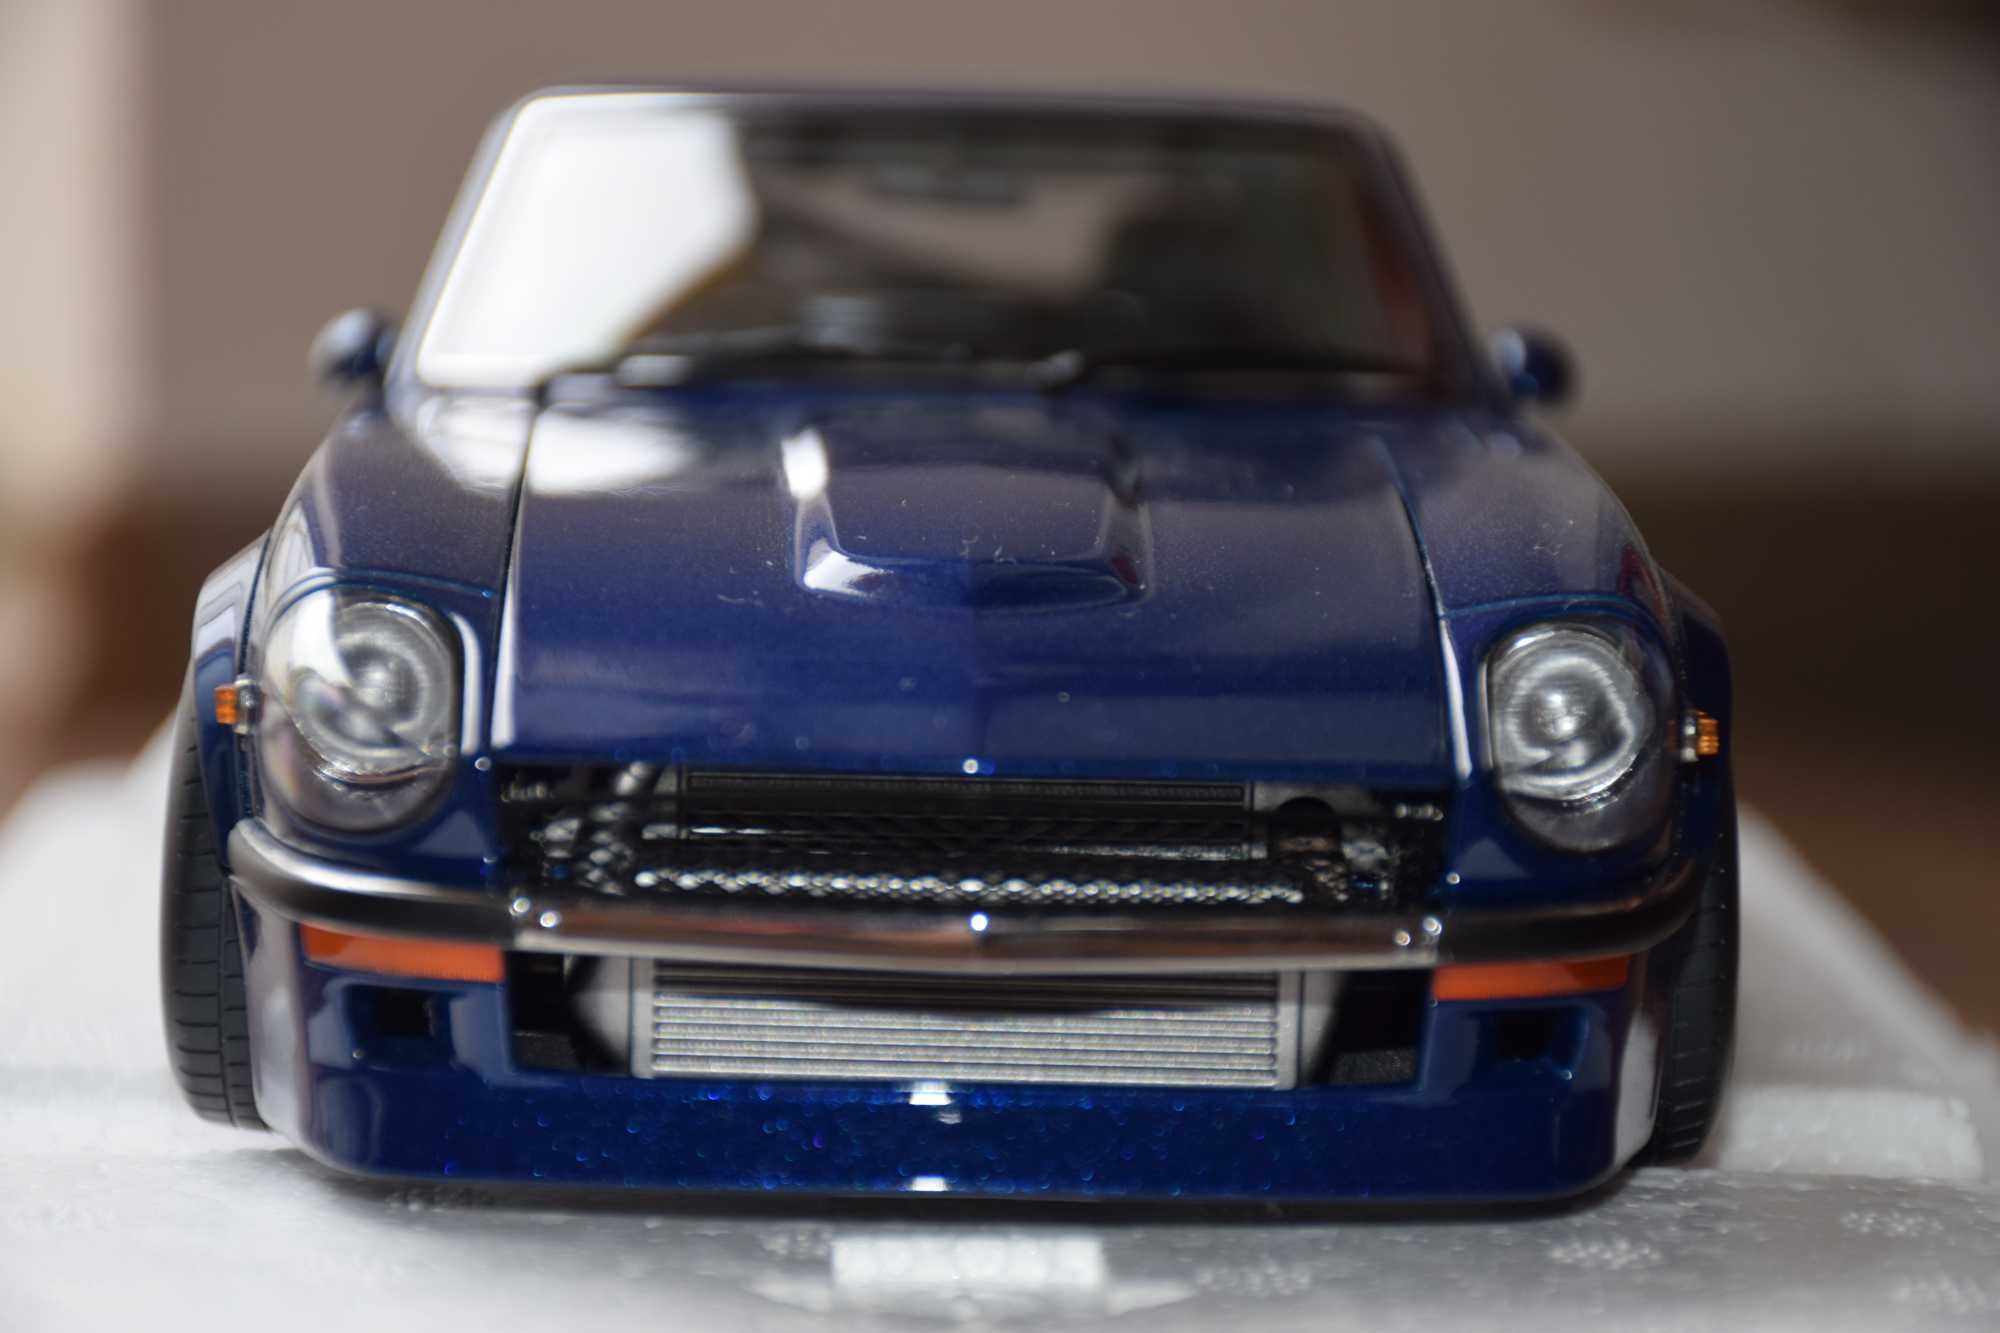 Autoart 1/18 Nissan Fairlady Z (No Kyosho,Almost Real,CMC, Norev)